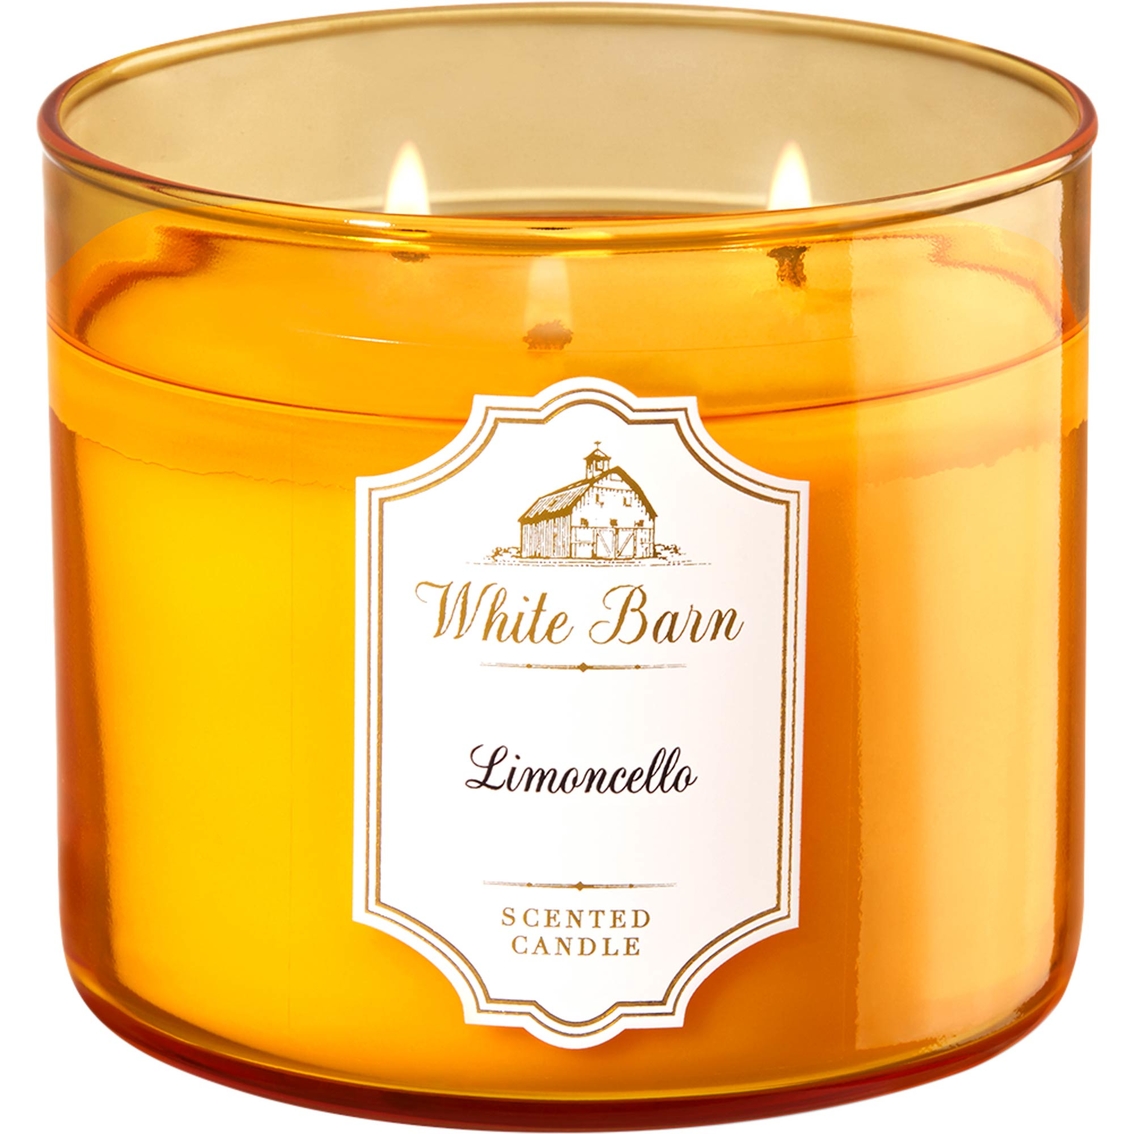 2 Bath & Body Works LIMONCELLO 3-Wick Filled Candle 14.5 oz 